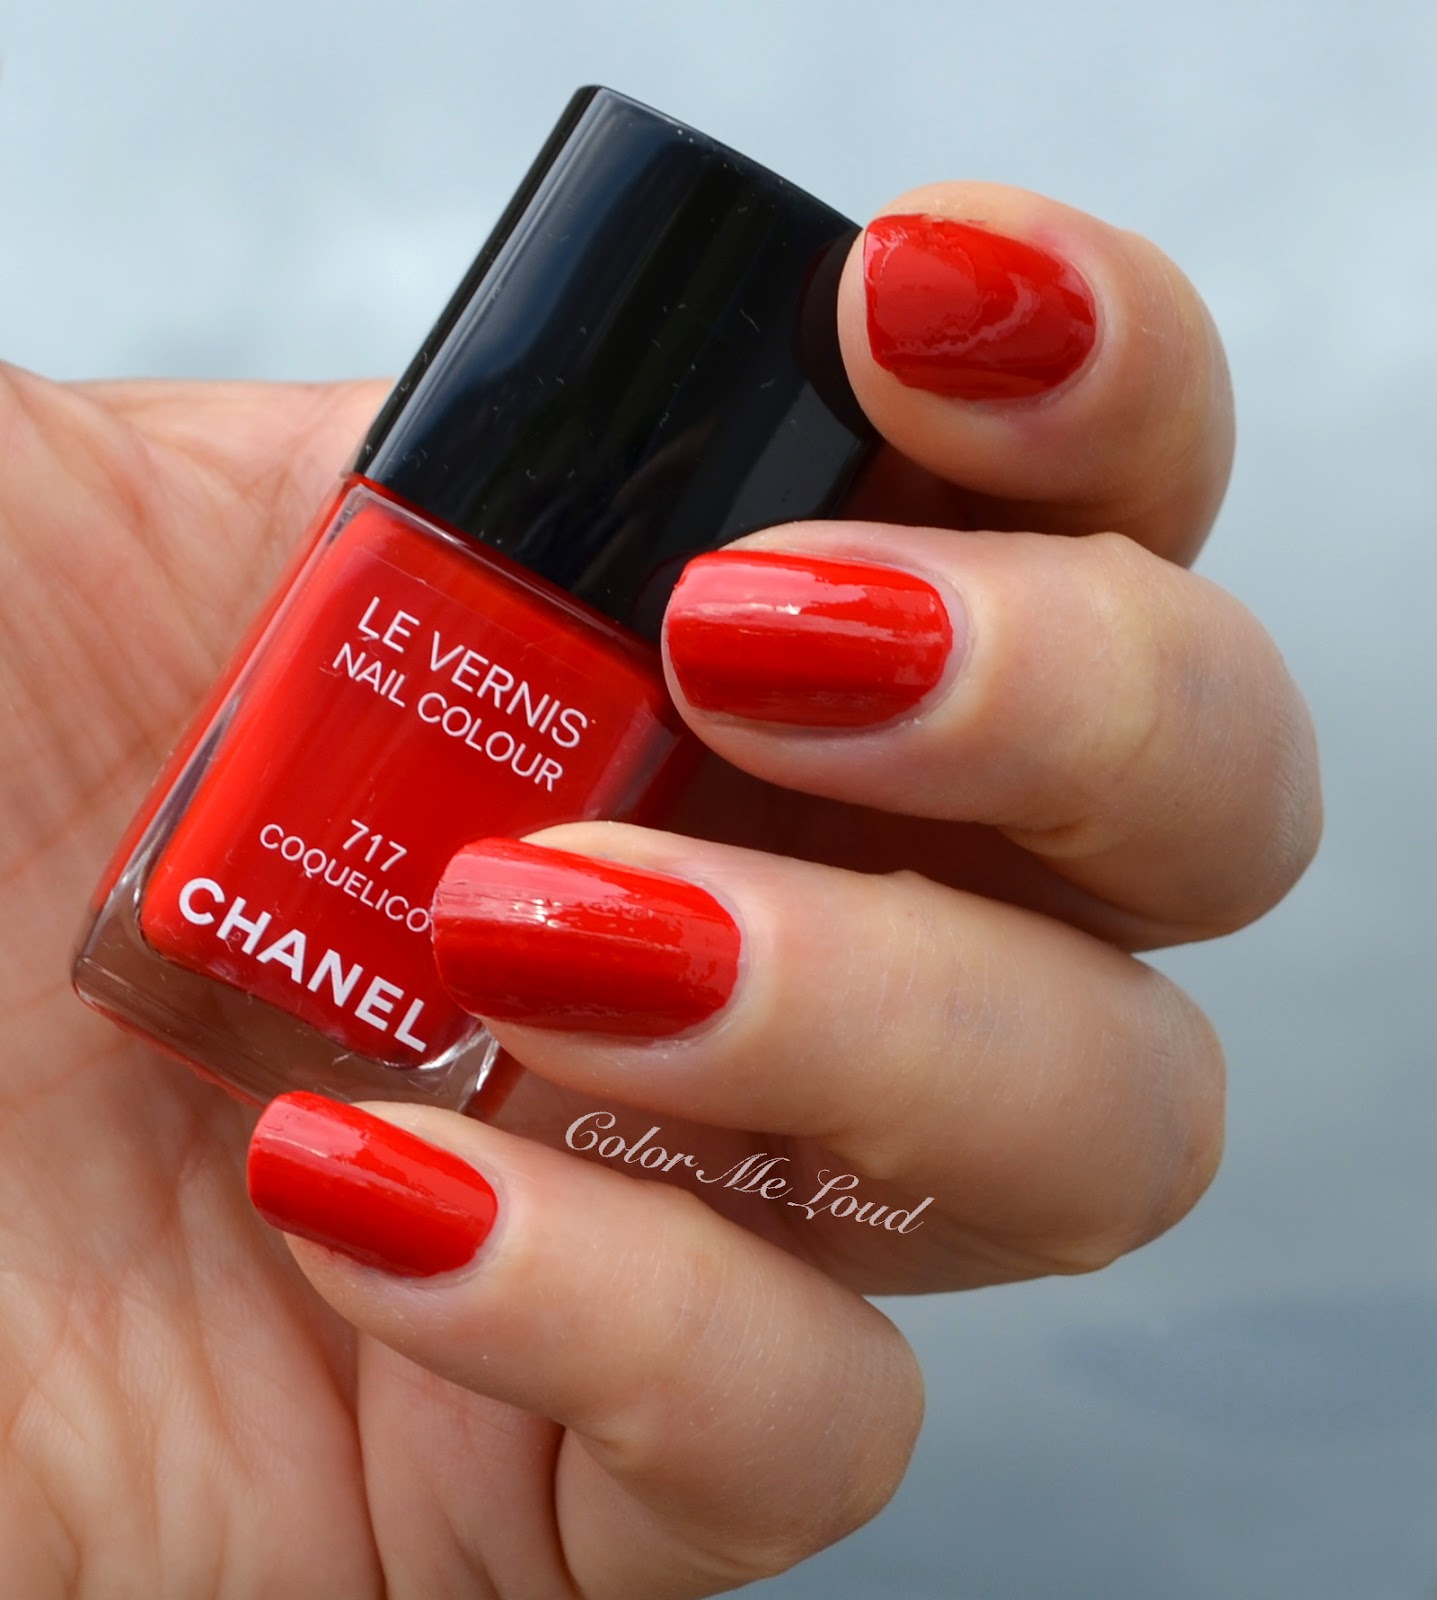 Chanel Le Vernis In 533 April, 535 May & 539 June